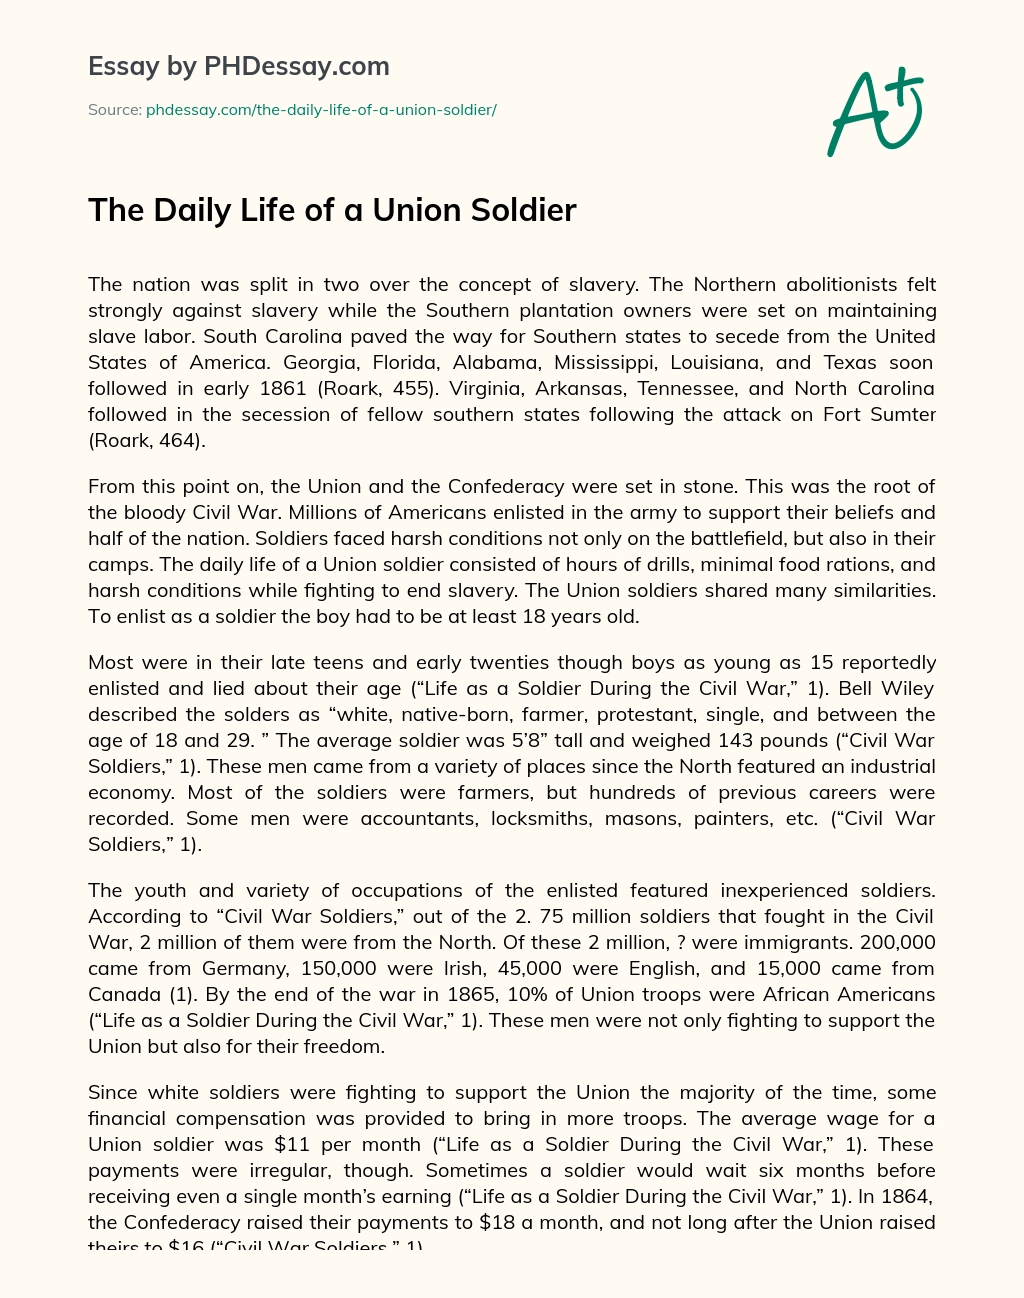 The Daily Life of a Union Soldier essay